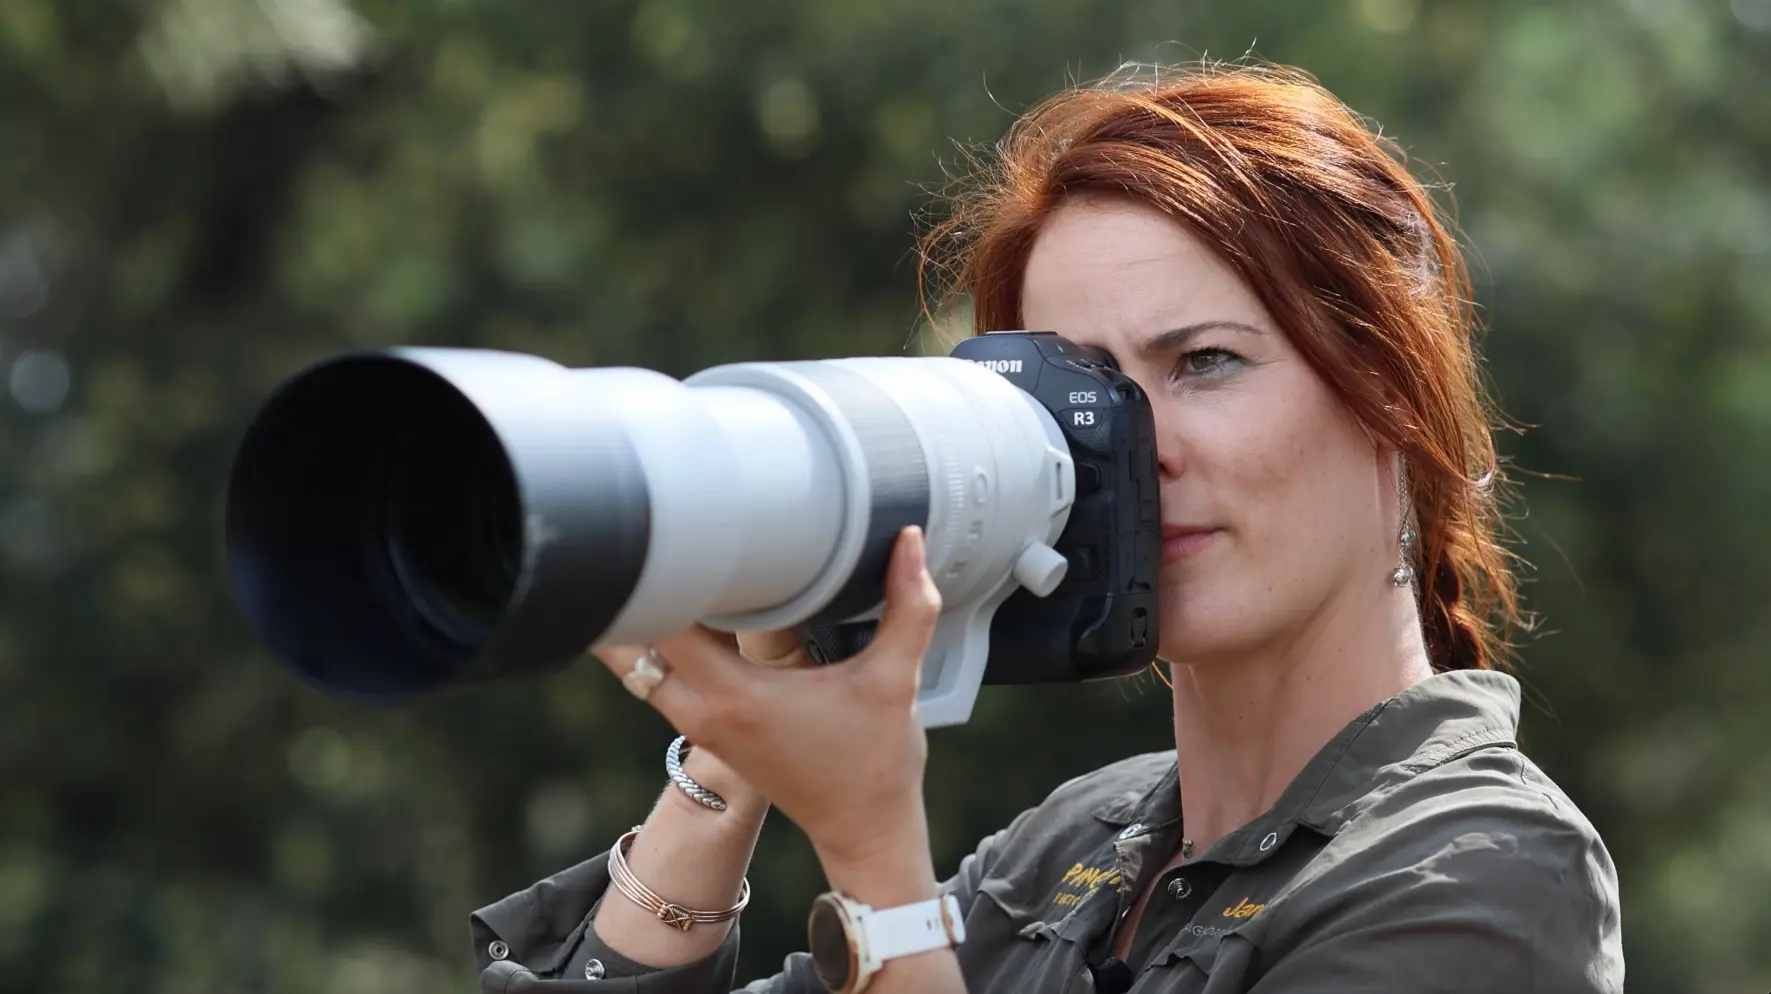 Janine Krayer testing the Canon 200 - 800mm lens for Wildlife Photography